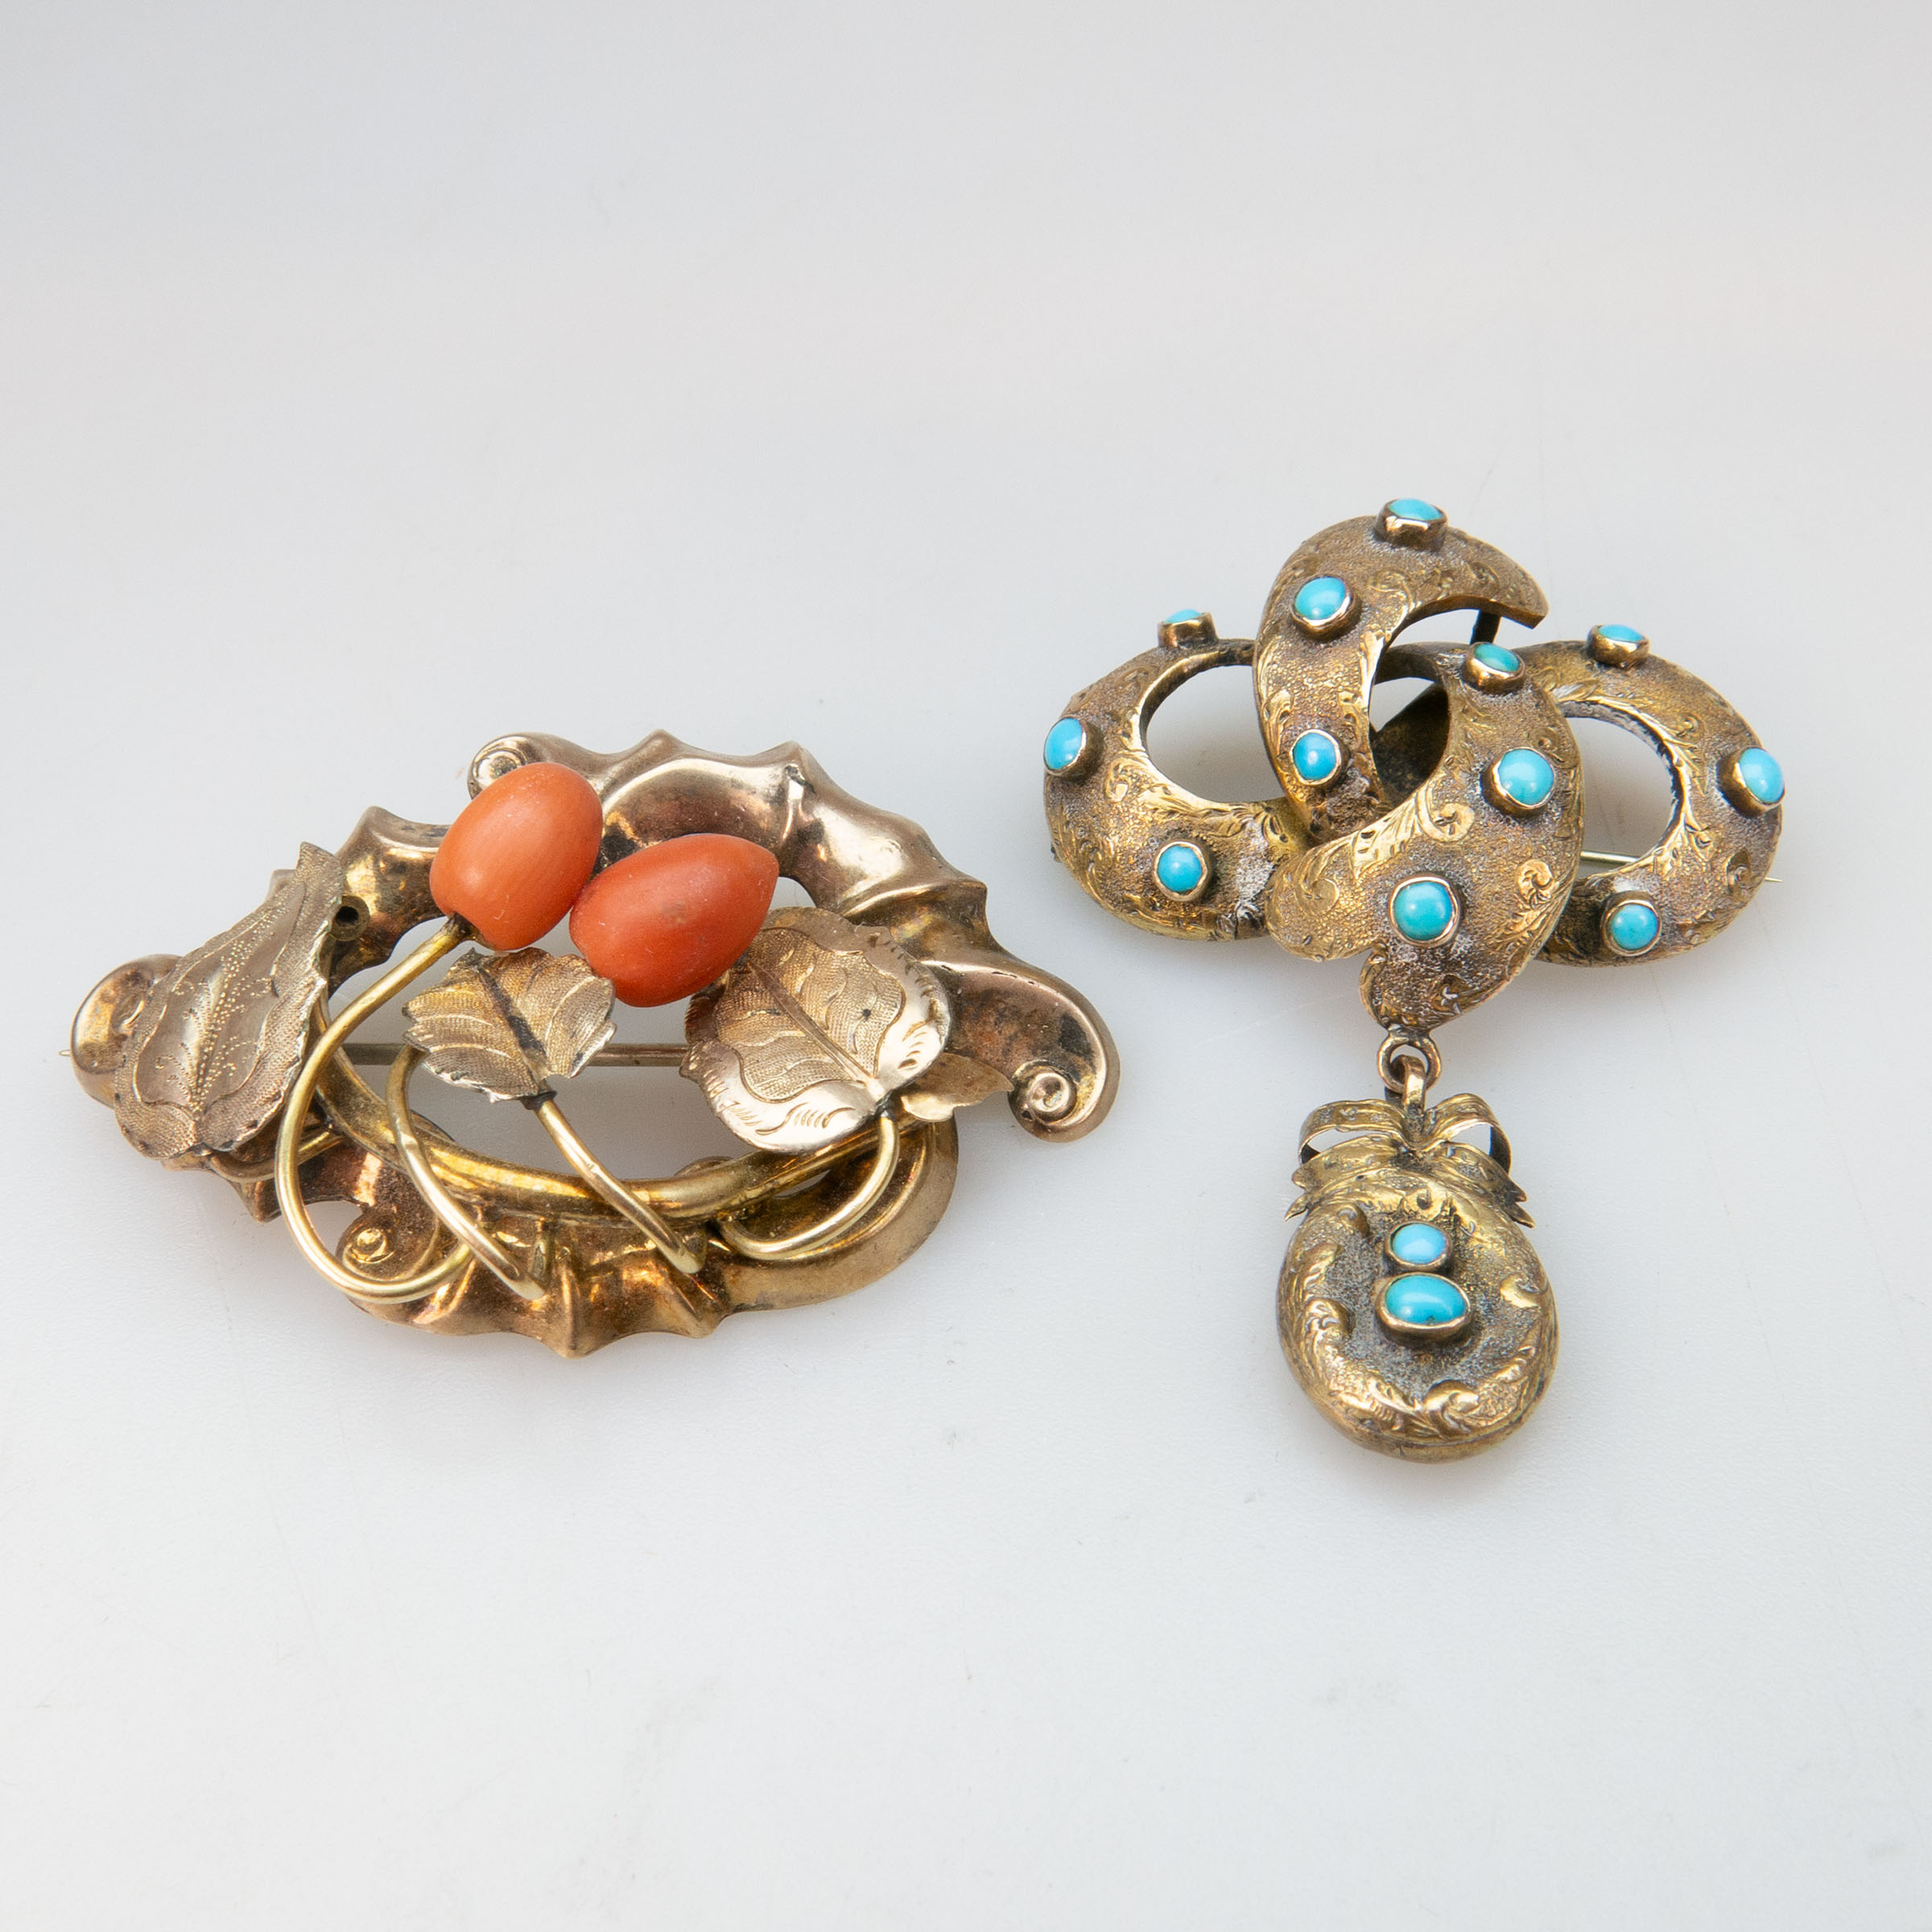 Two 19th Century Gold Brooches